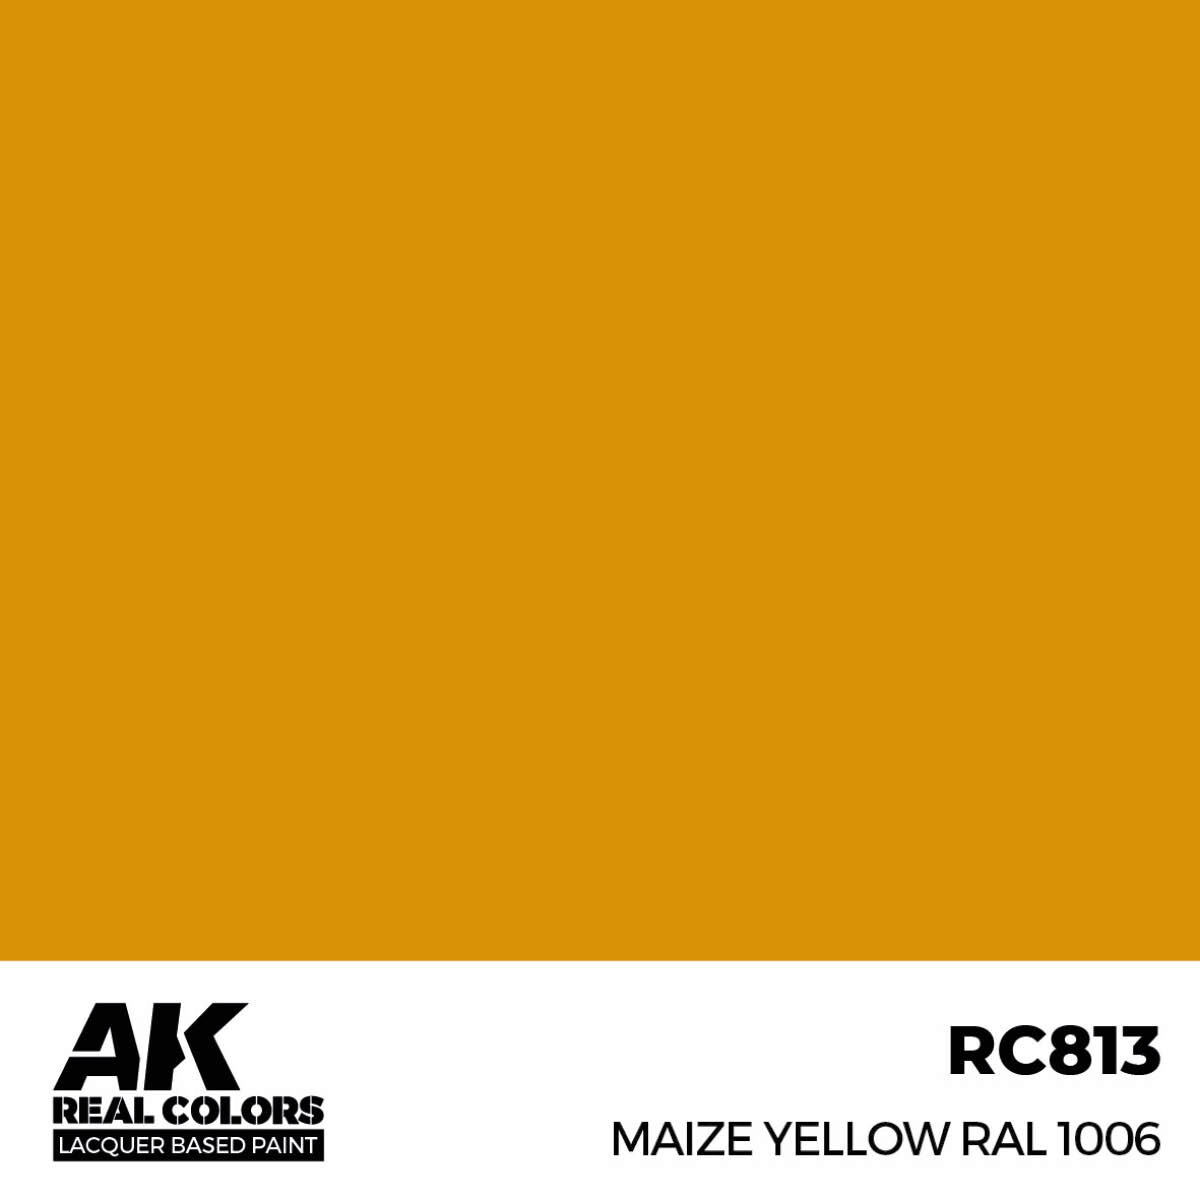 AK RC813 Real Colors Maize Yellow RAL 1006 17 ml.